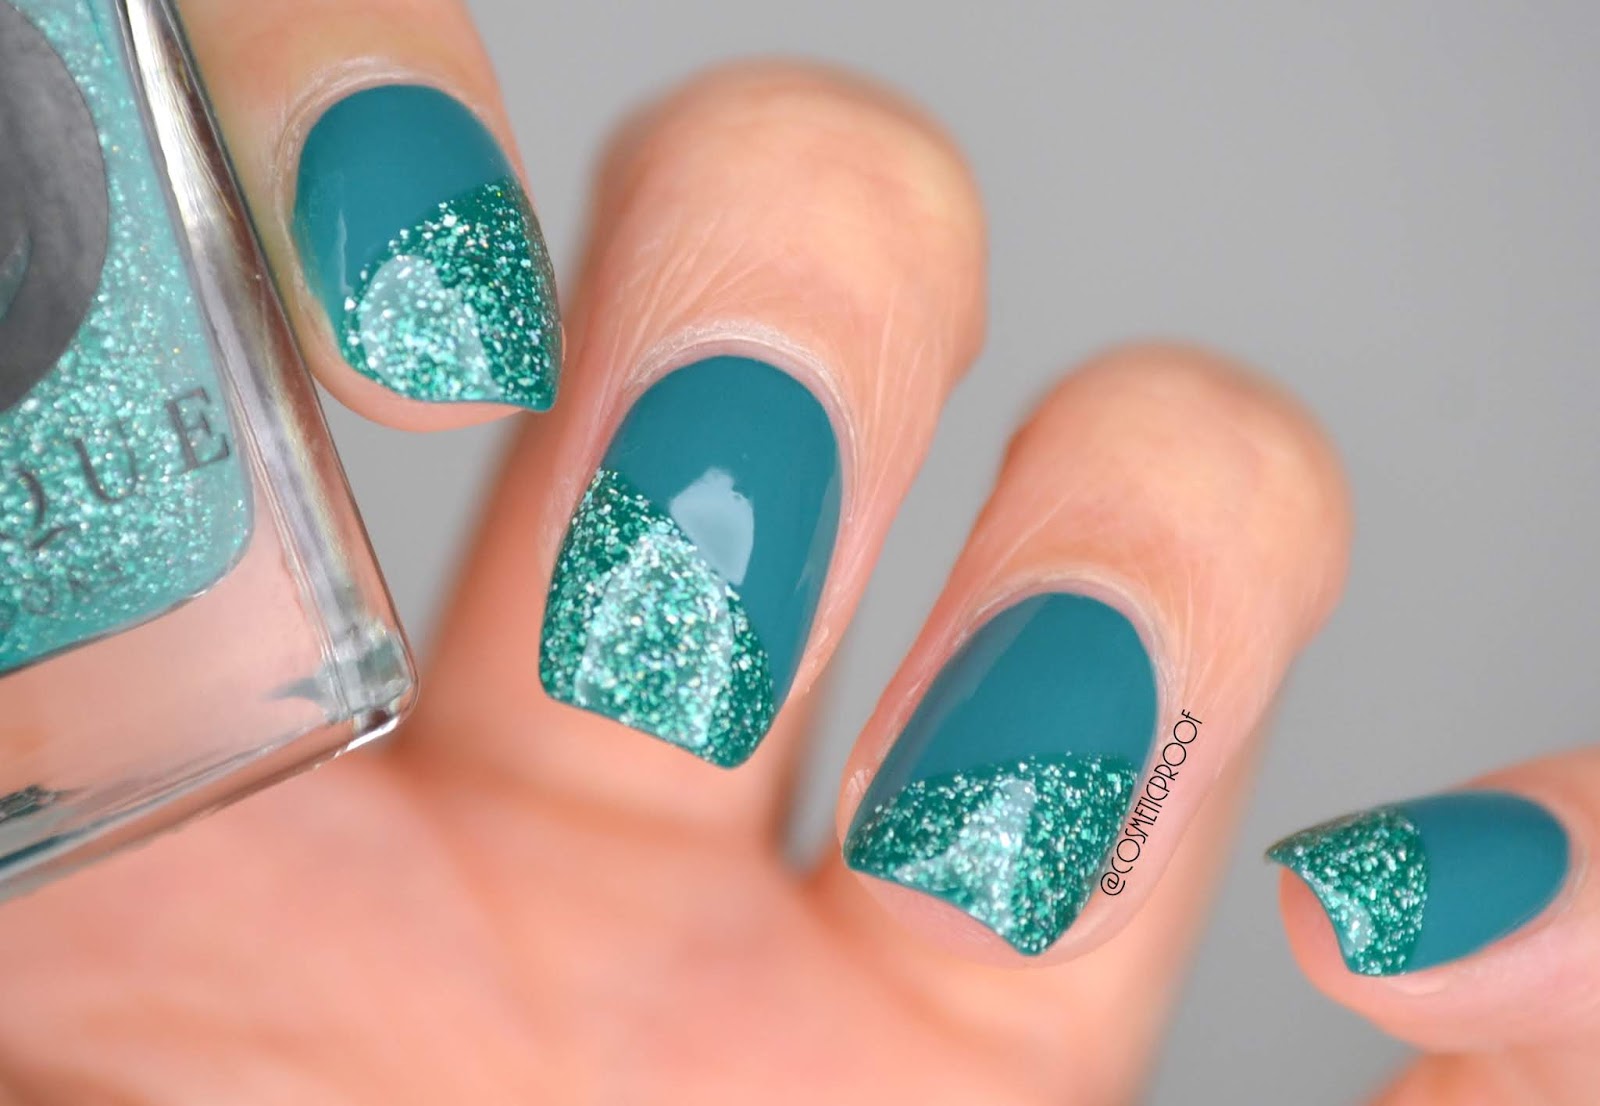 Teal and Gold SNS Nail Design - wide 8